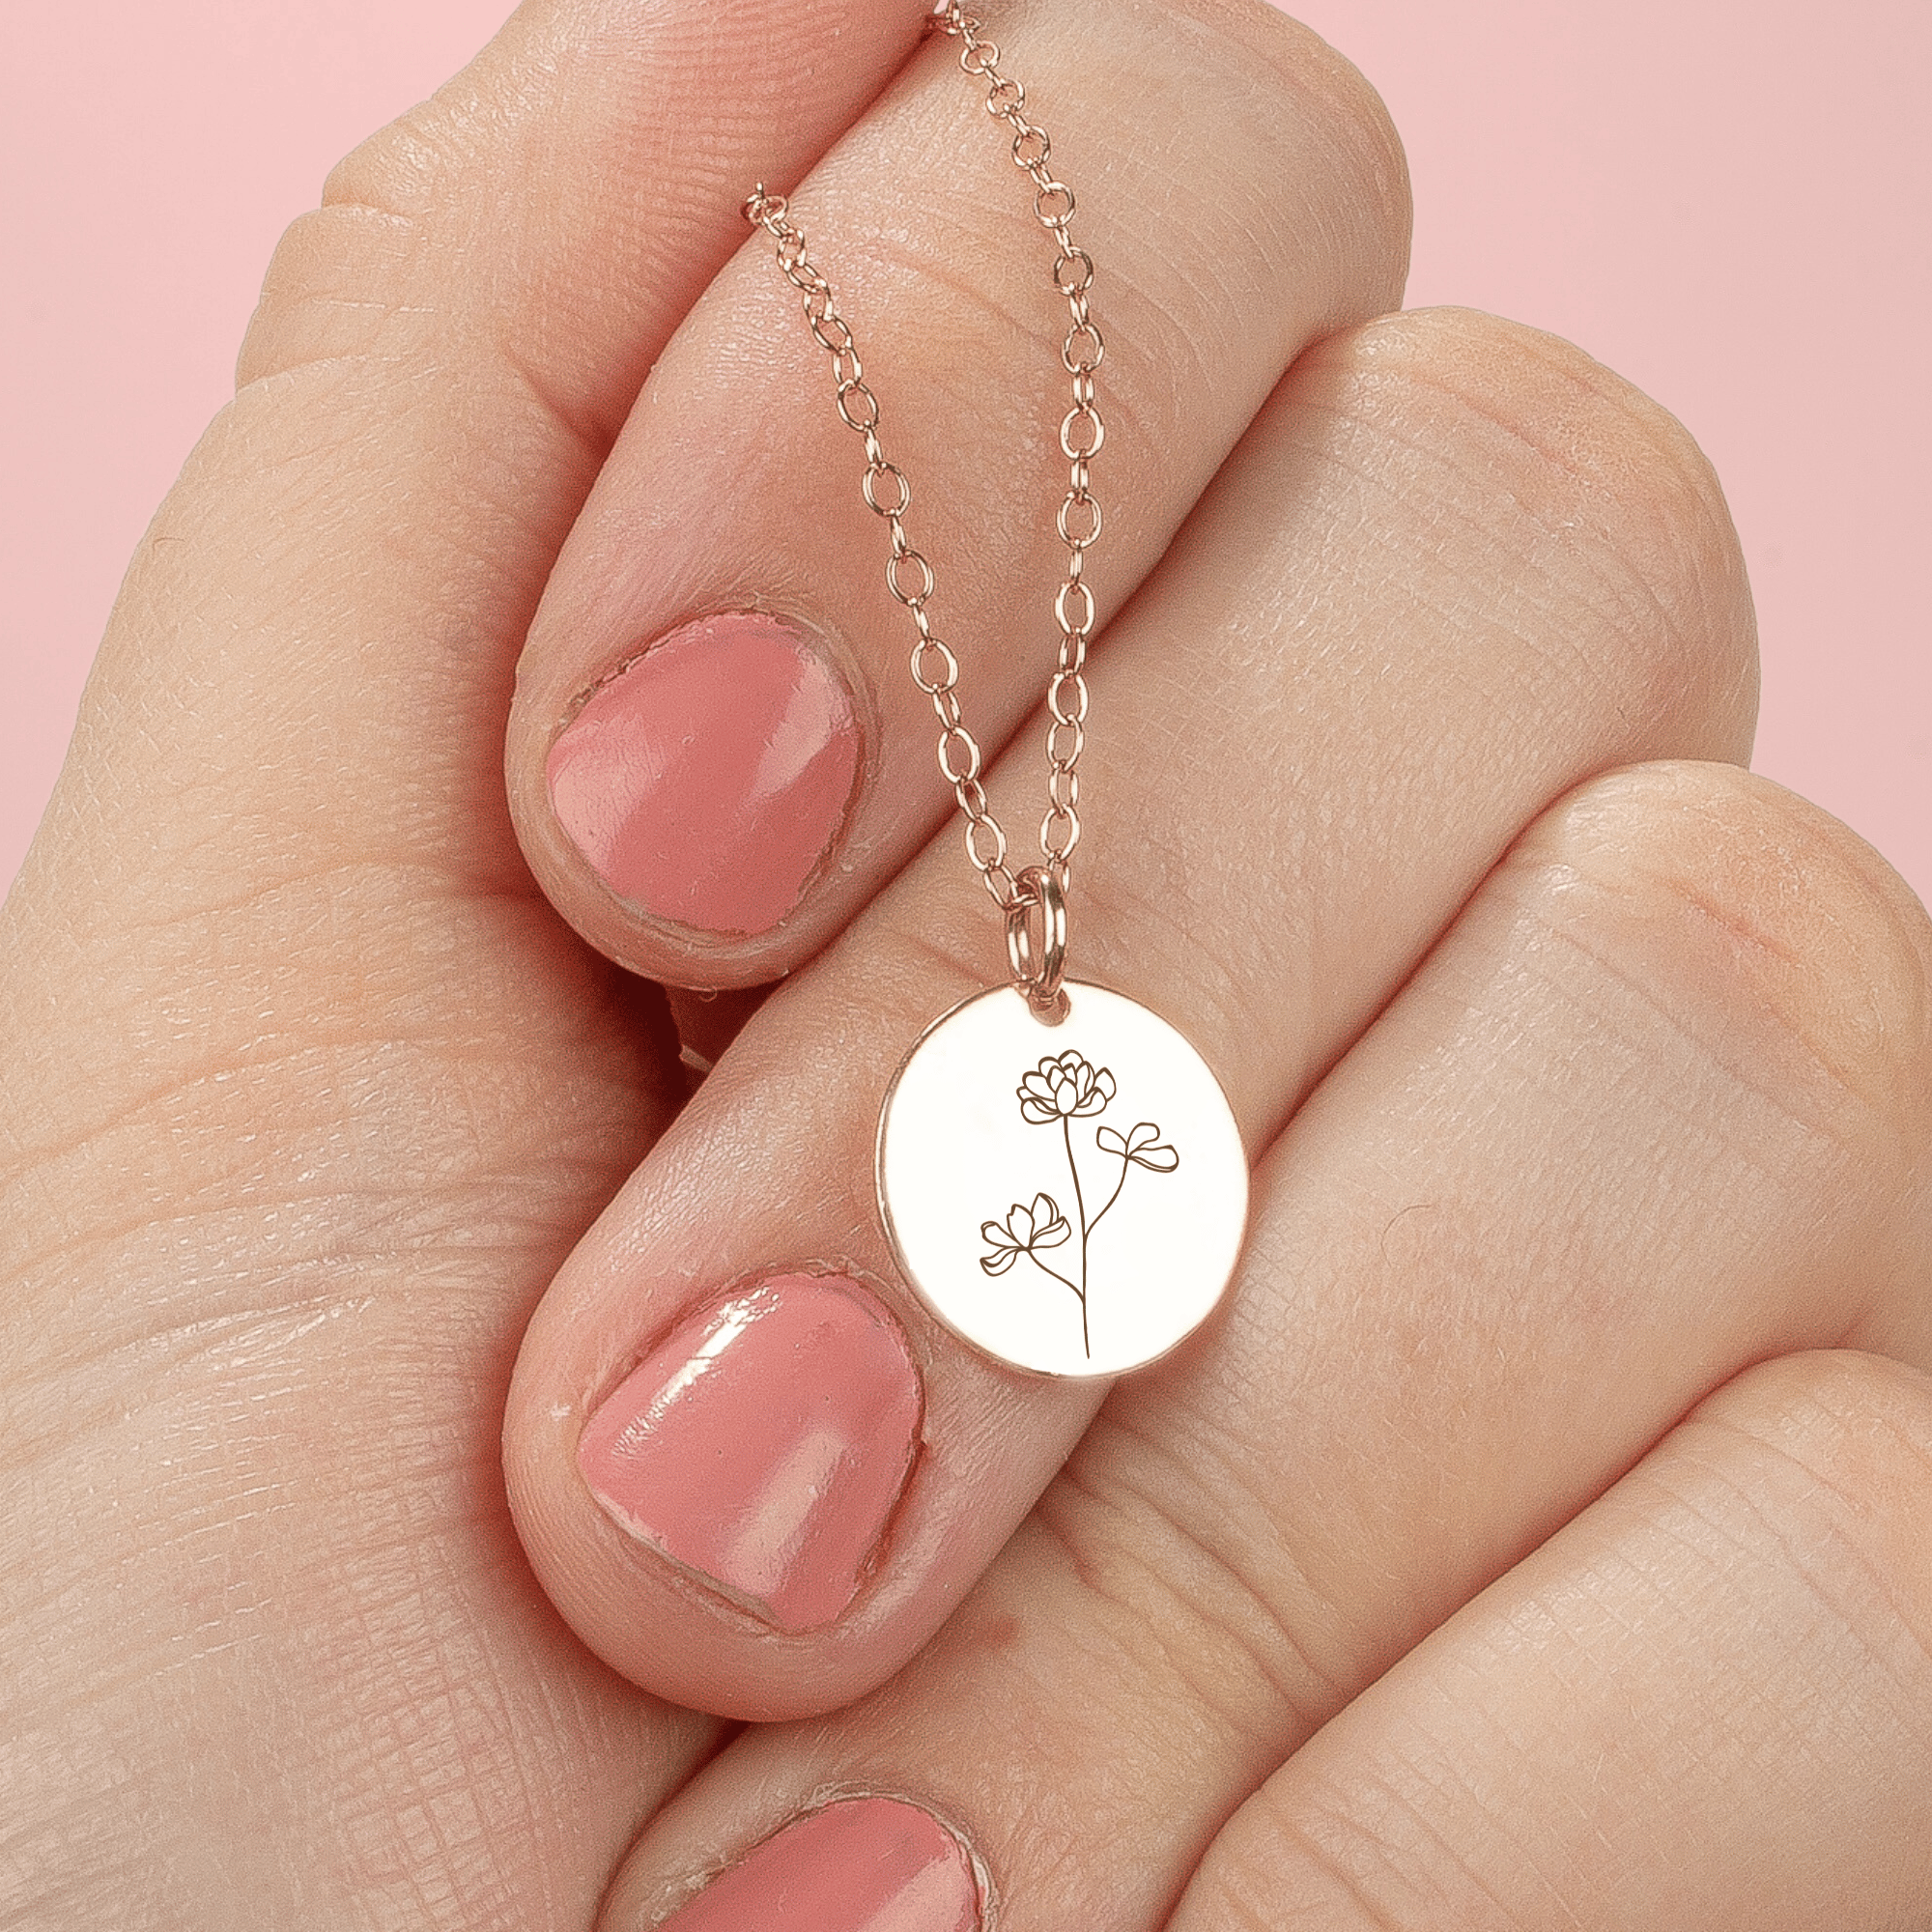 Peony Flowers Disc Necklace - Melanie Golden Jewelry - bridesmaid, disc necklaces, Engraved Jewelry, everyday, flora, minimal minimal necklace, minimal necklace, necklace, necklaces, symbolic, wedding, wedding party